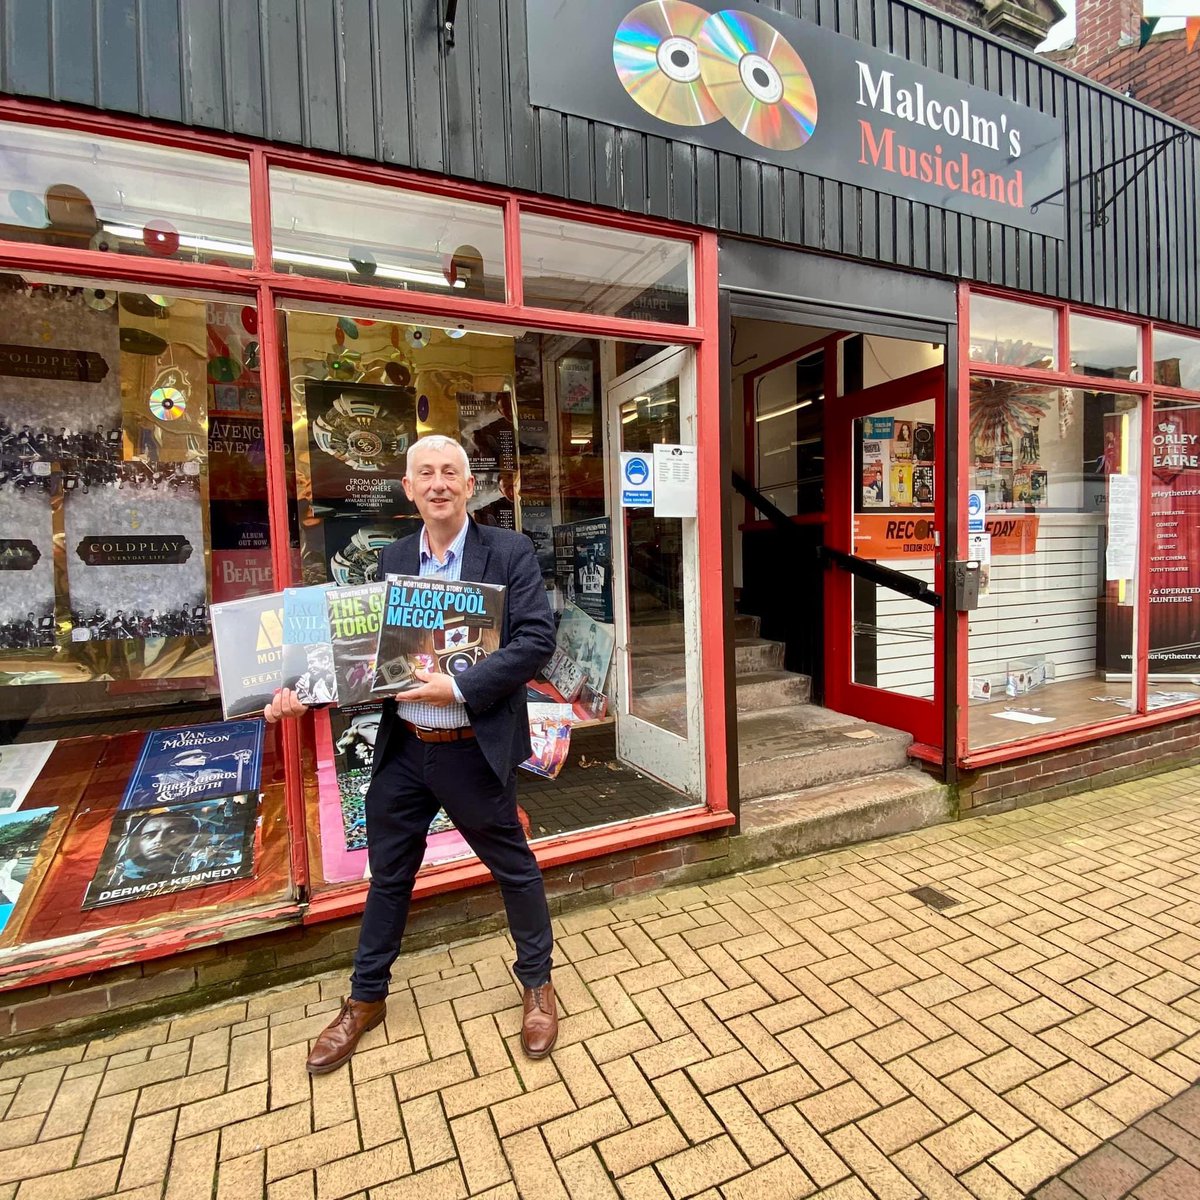 Many of you may not know that “back in the day” @CommonsSpeaker was a Northern Soul Boy. Pic taken outside our local record store “Malcolm’s Musicland”. Managed to bag myself a brace of great albums yesterday too. #RecordStoreDay2024 #RecordStoreDay #ChorleyLife #NorthernSoul